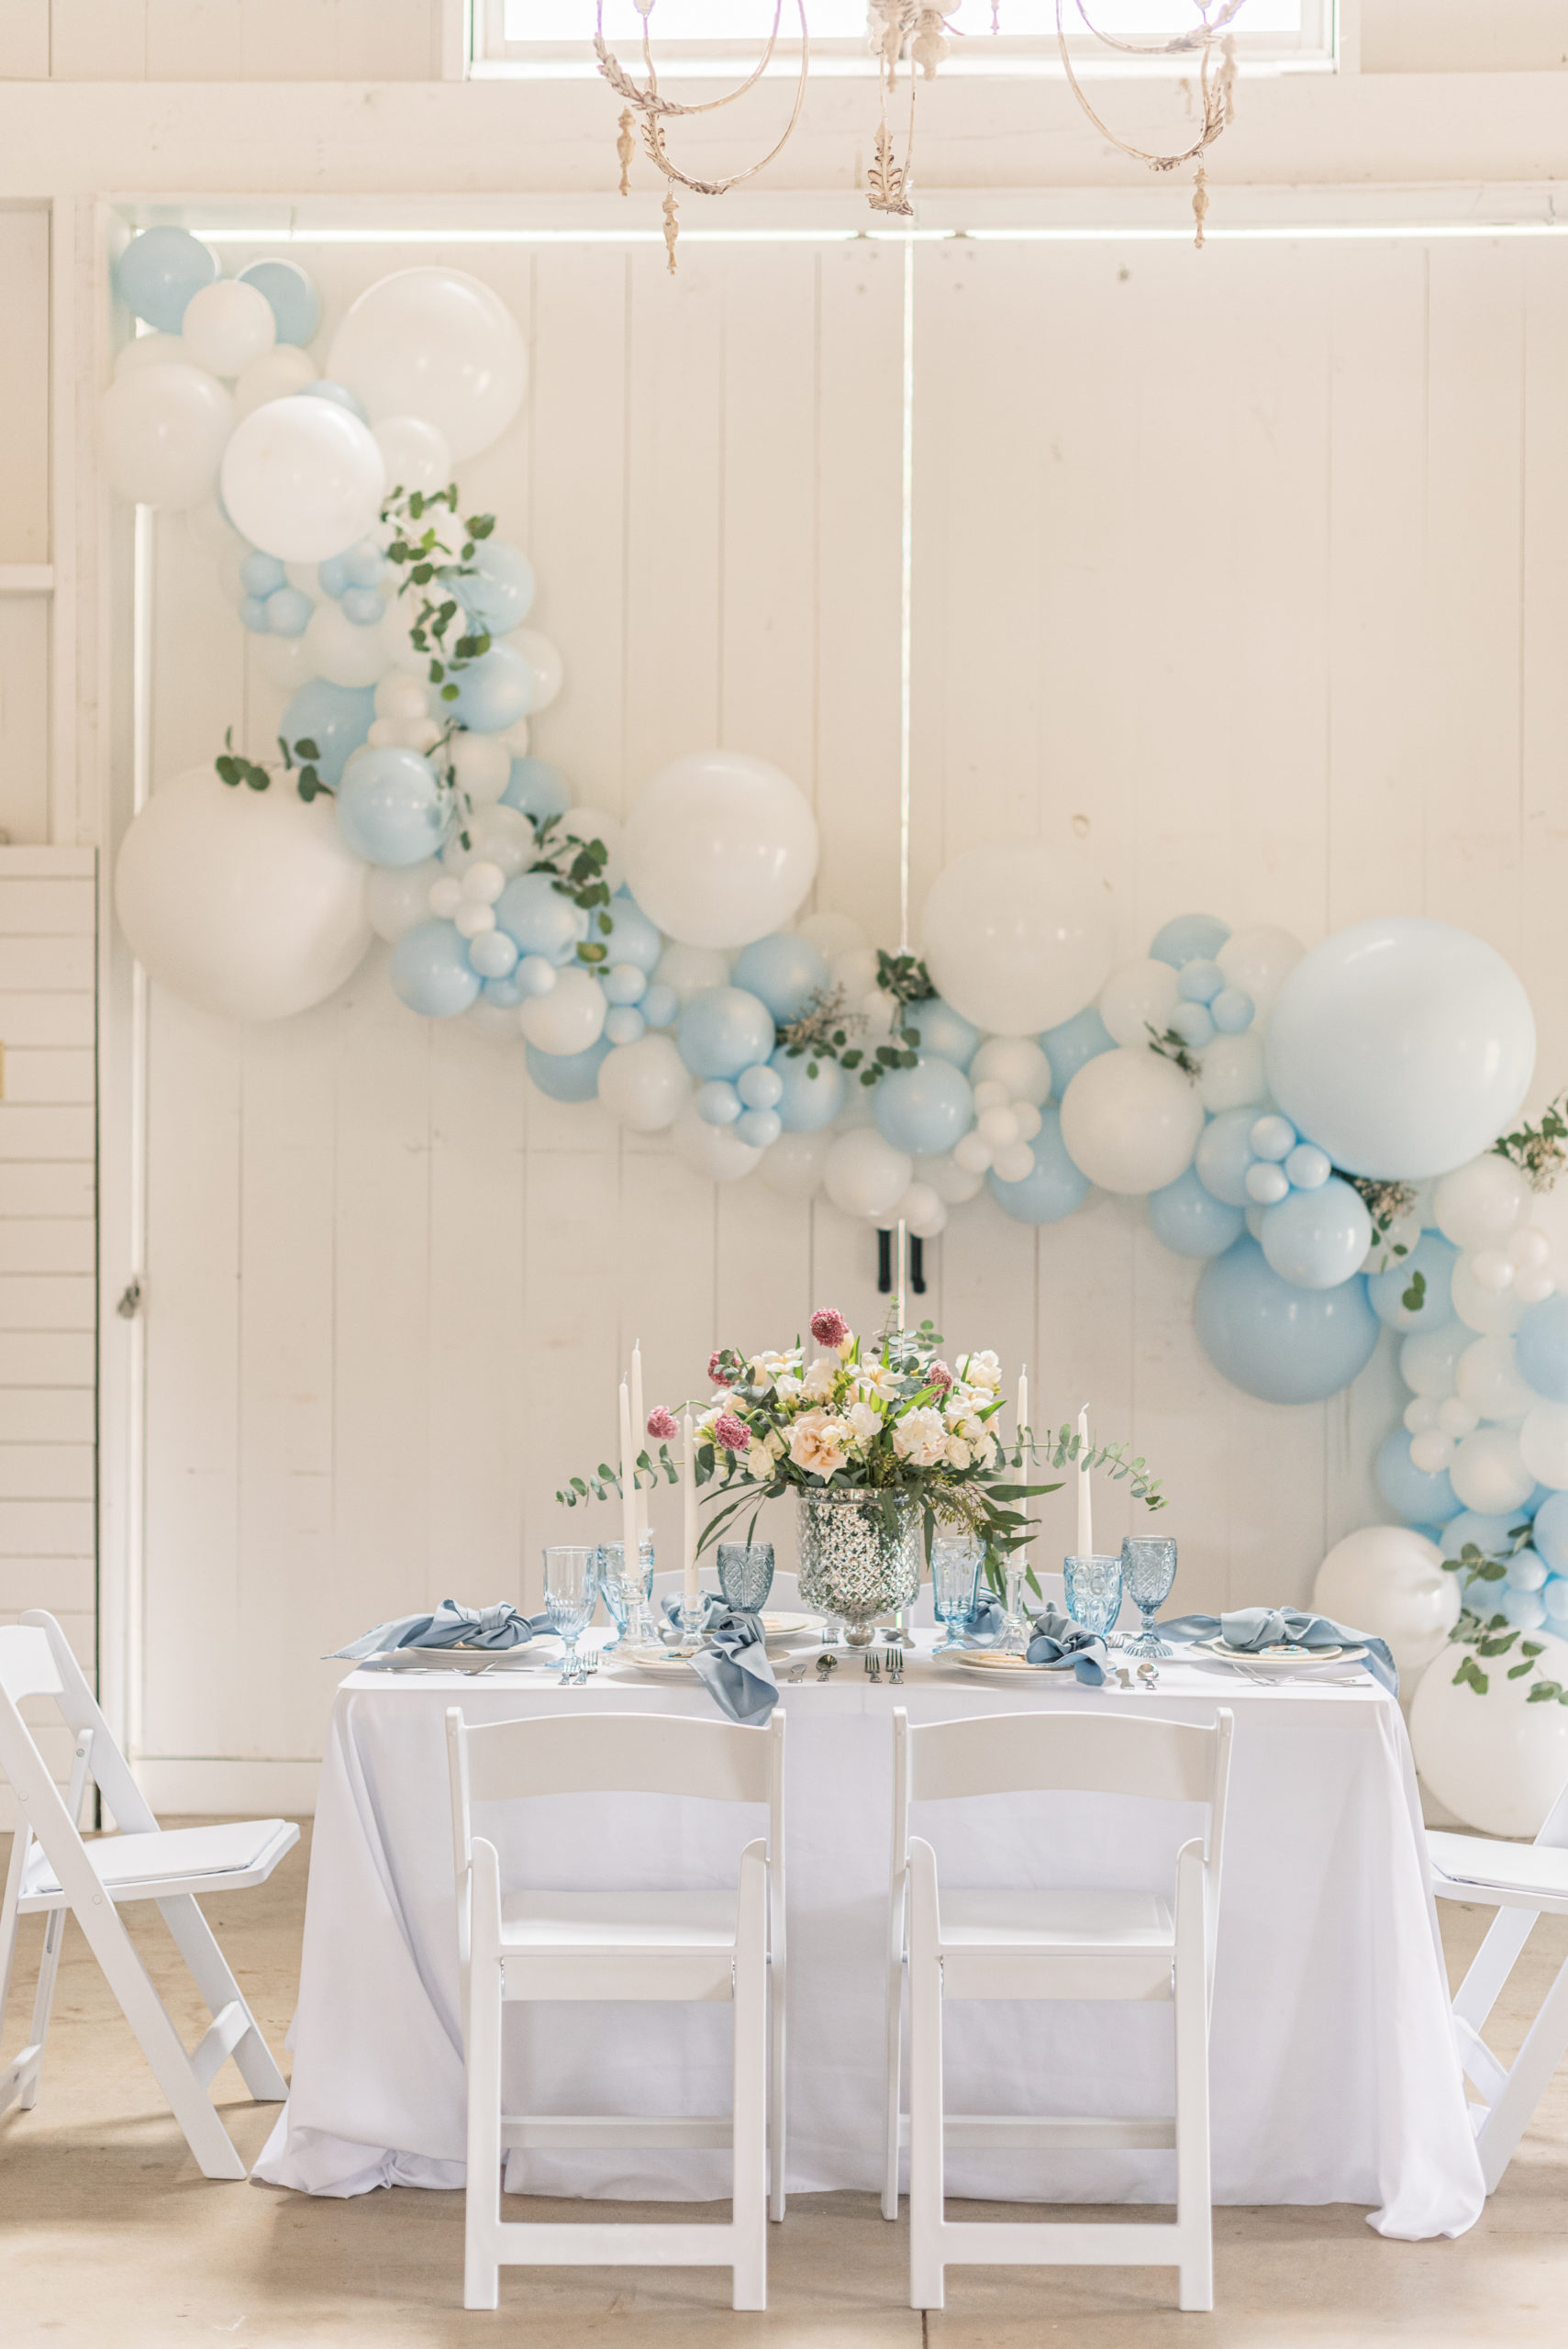 Horse birthday party - garland balloons in white and light blue adorn with silver dollar eucalyptus